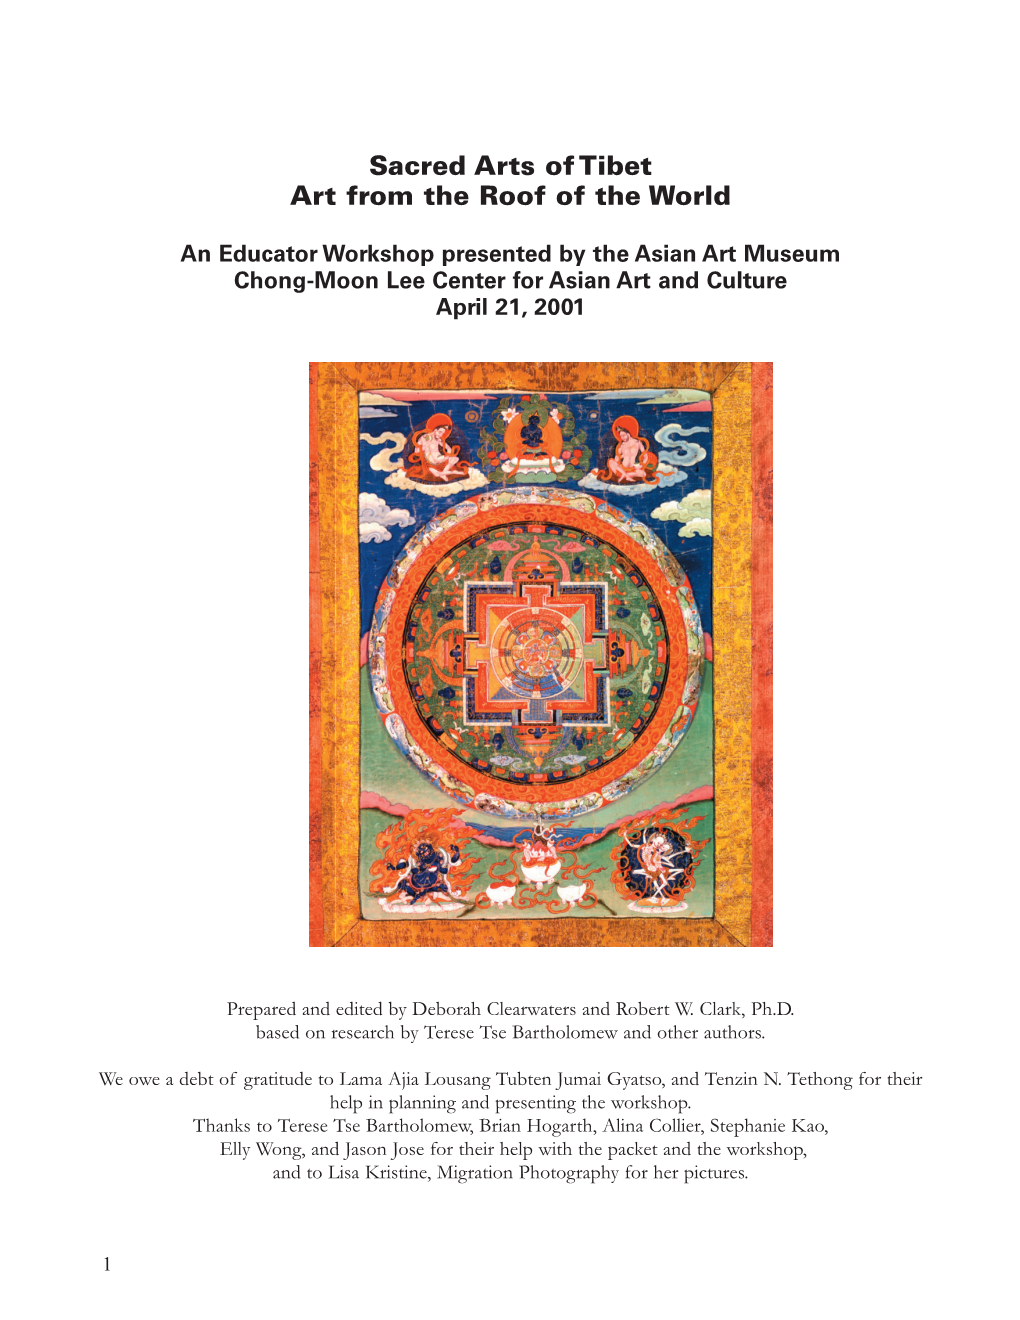 Sacred Arts of Tibet: Art from the Roof of the World